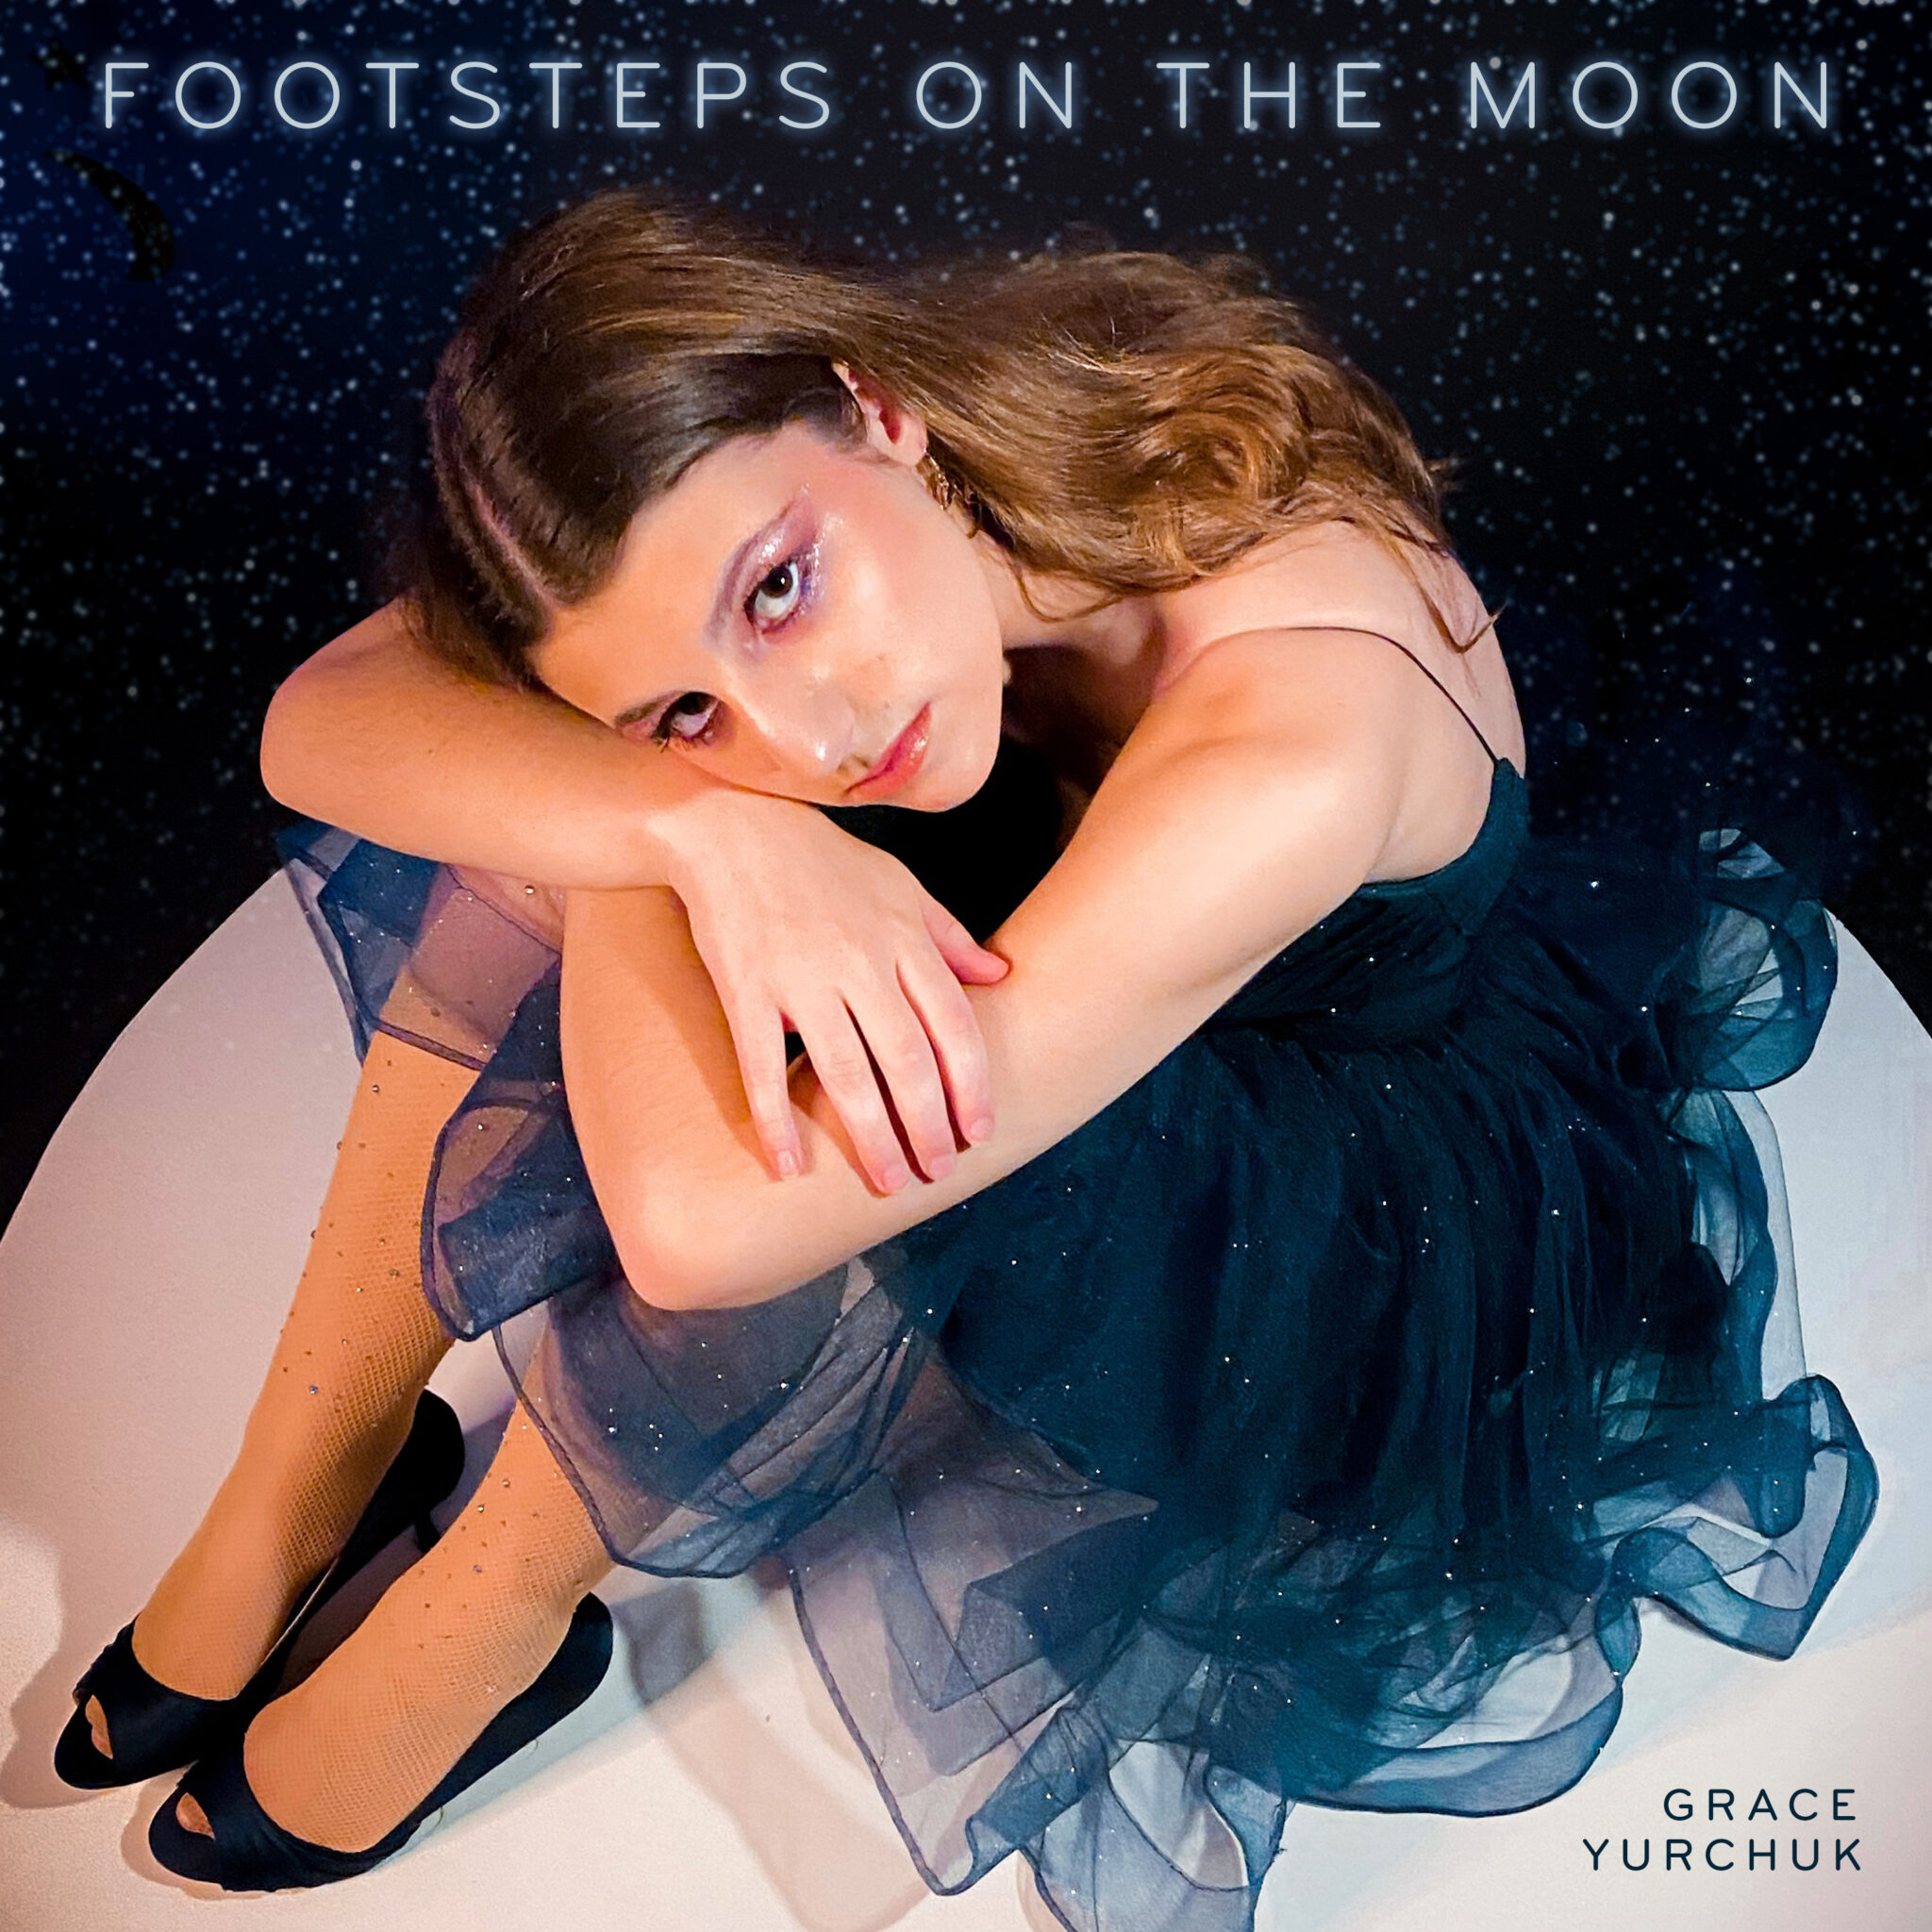 Grace Yurchuk - Footsteps on the Moon